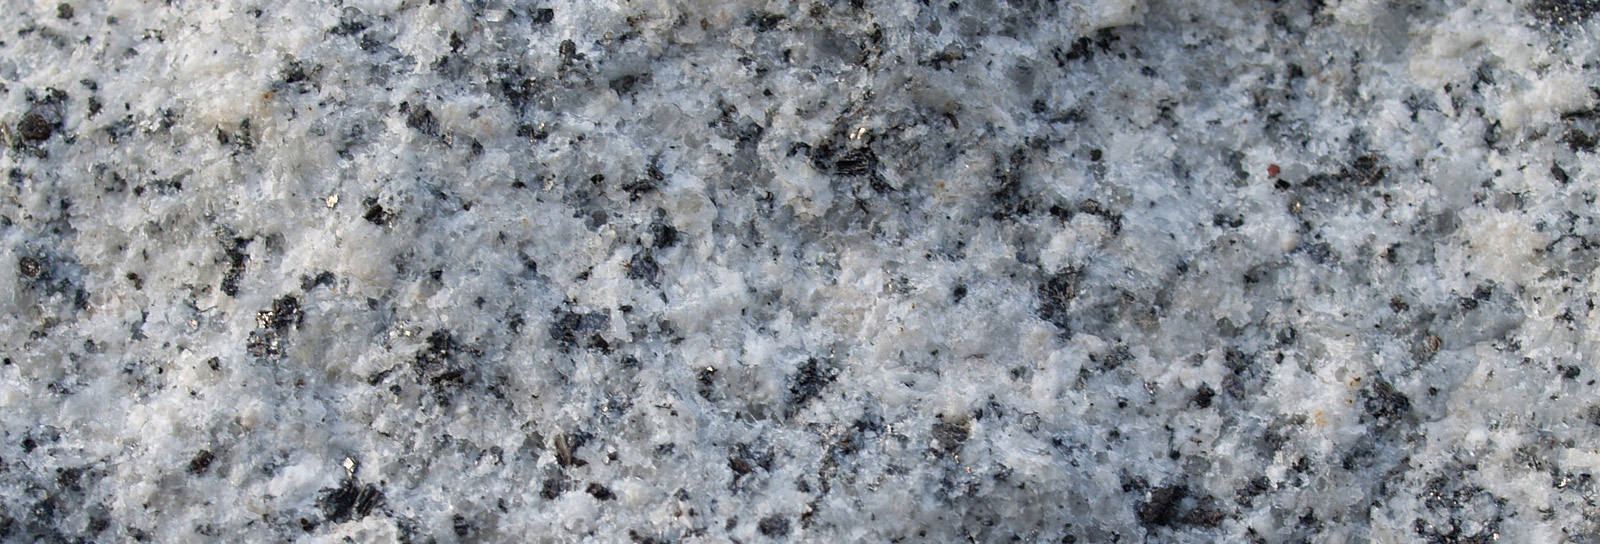 Preserving Your Granite Countertops Cliff Maness Construction